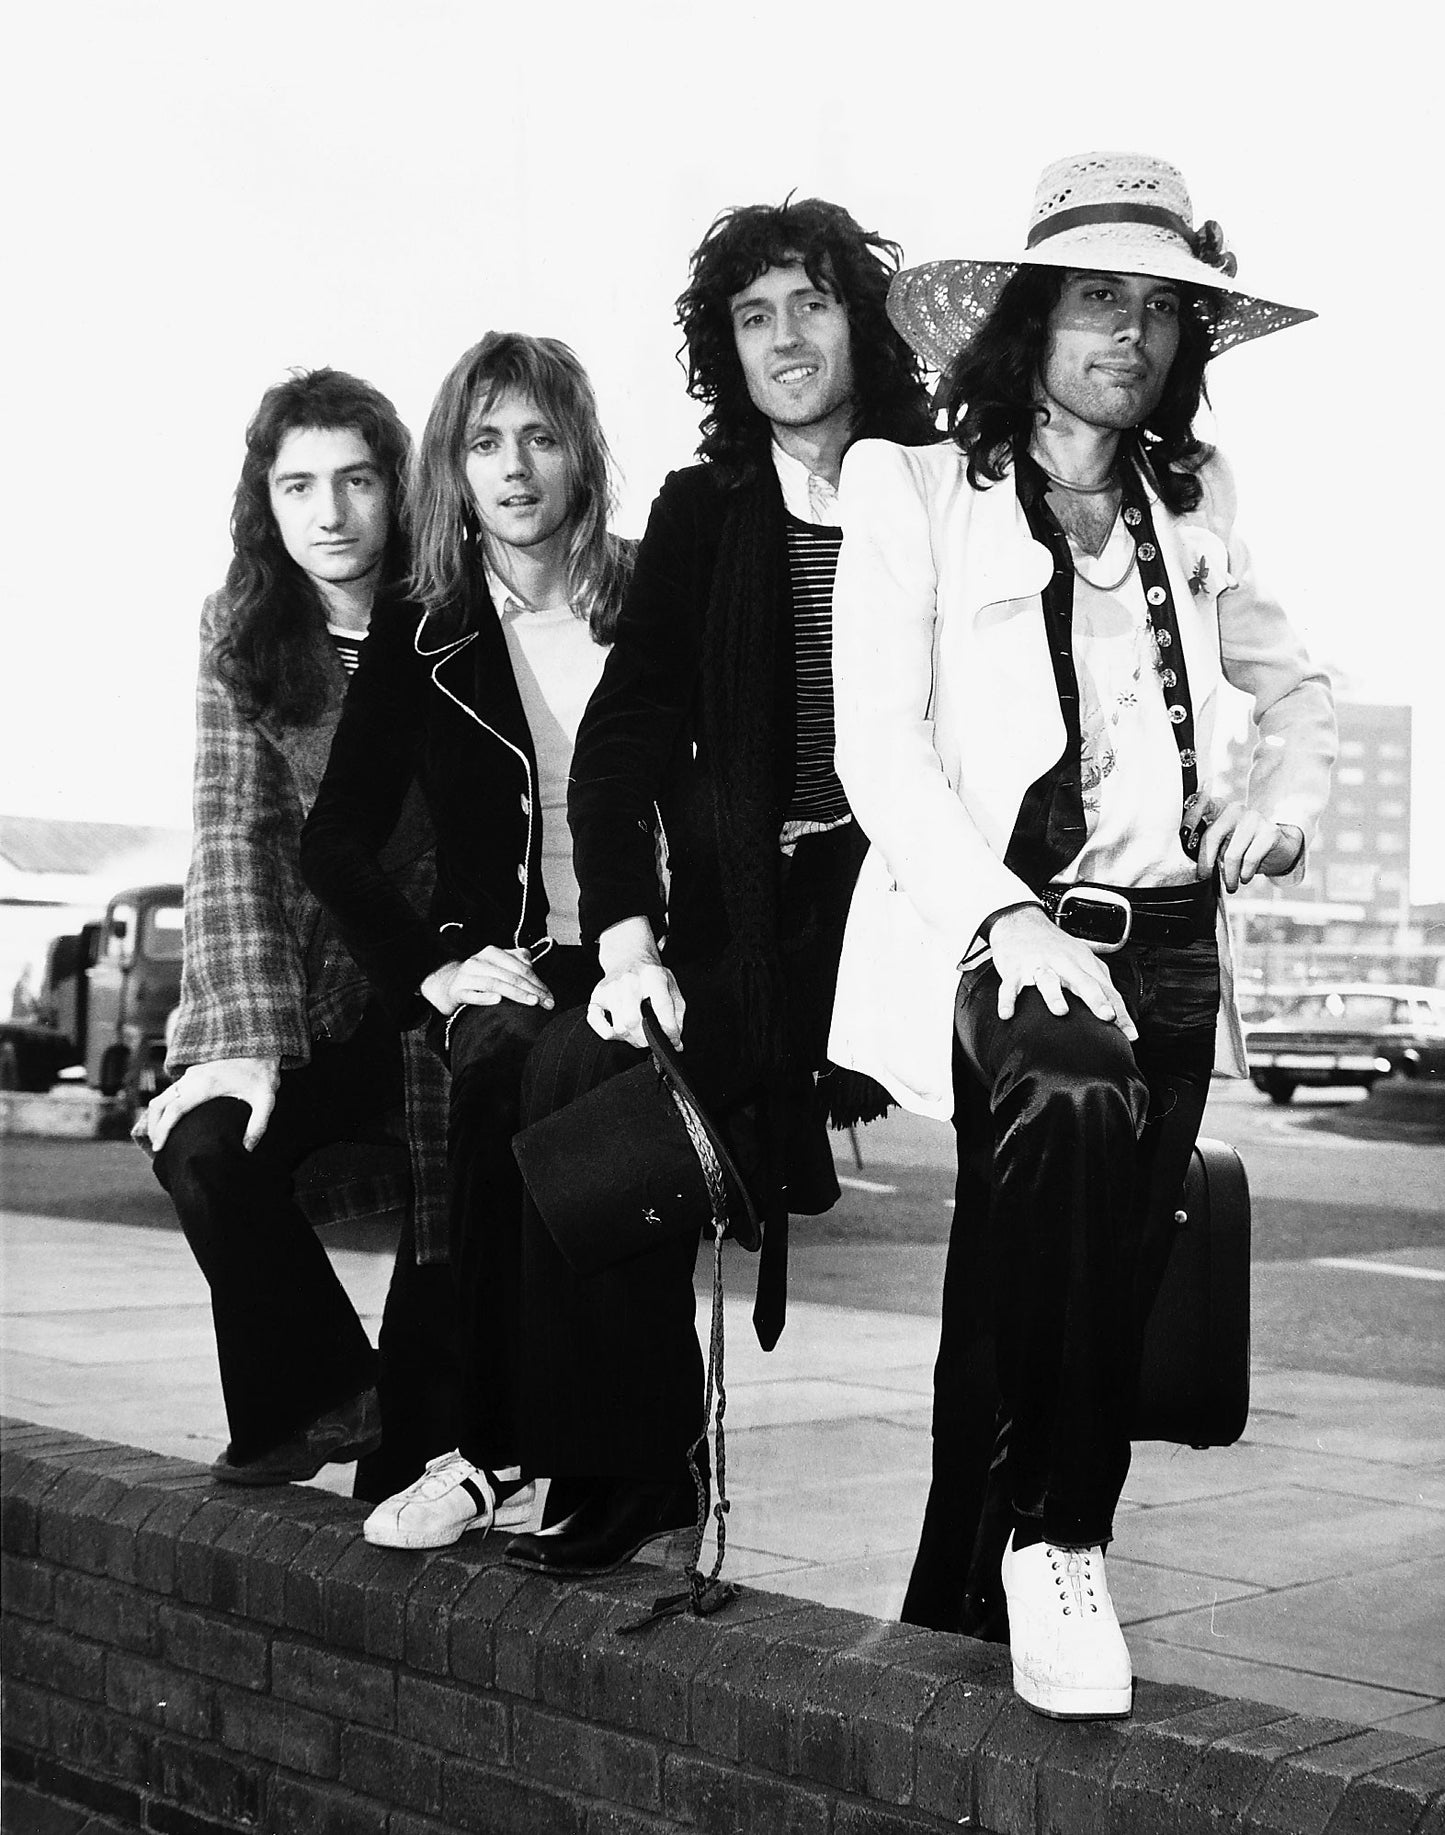 Queen - Band Smiling at a Photoshoot, England, 1970s Poster